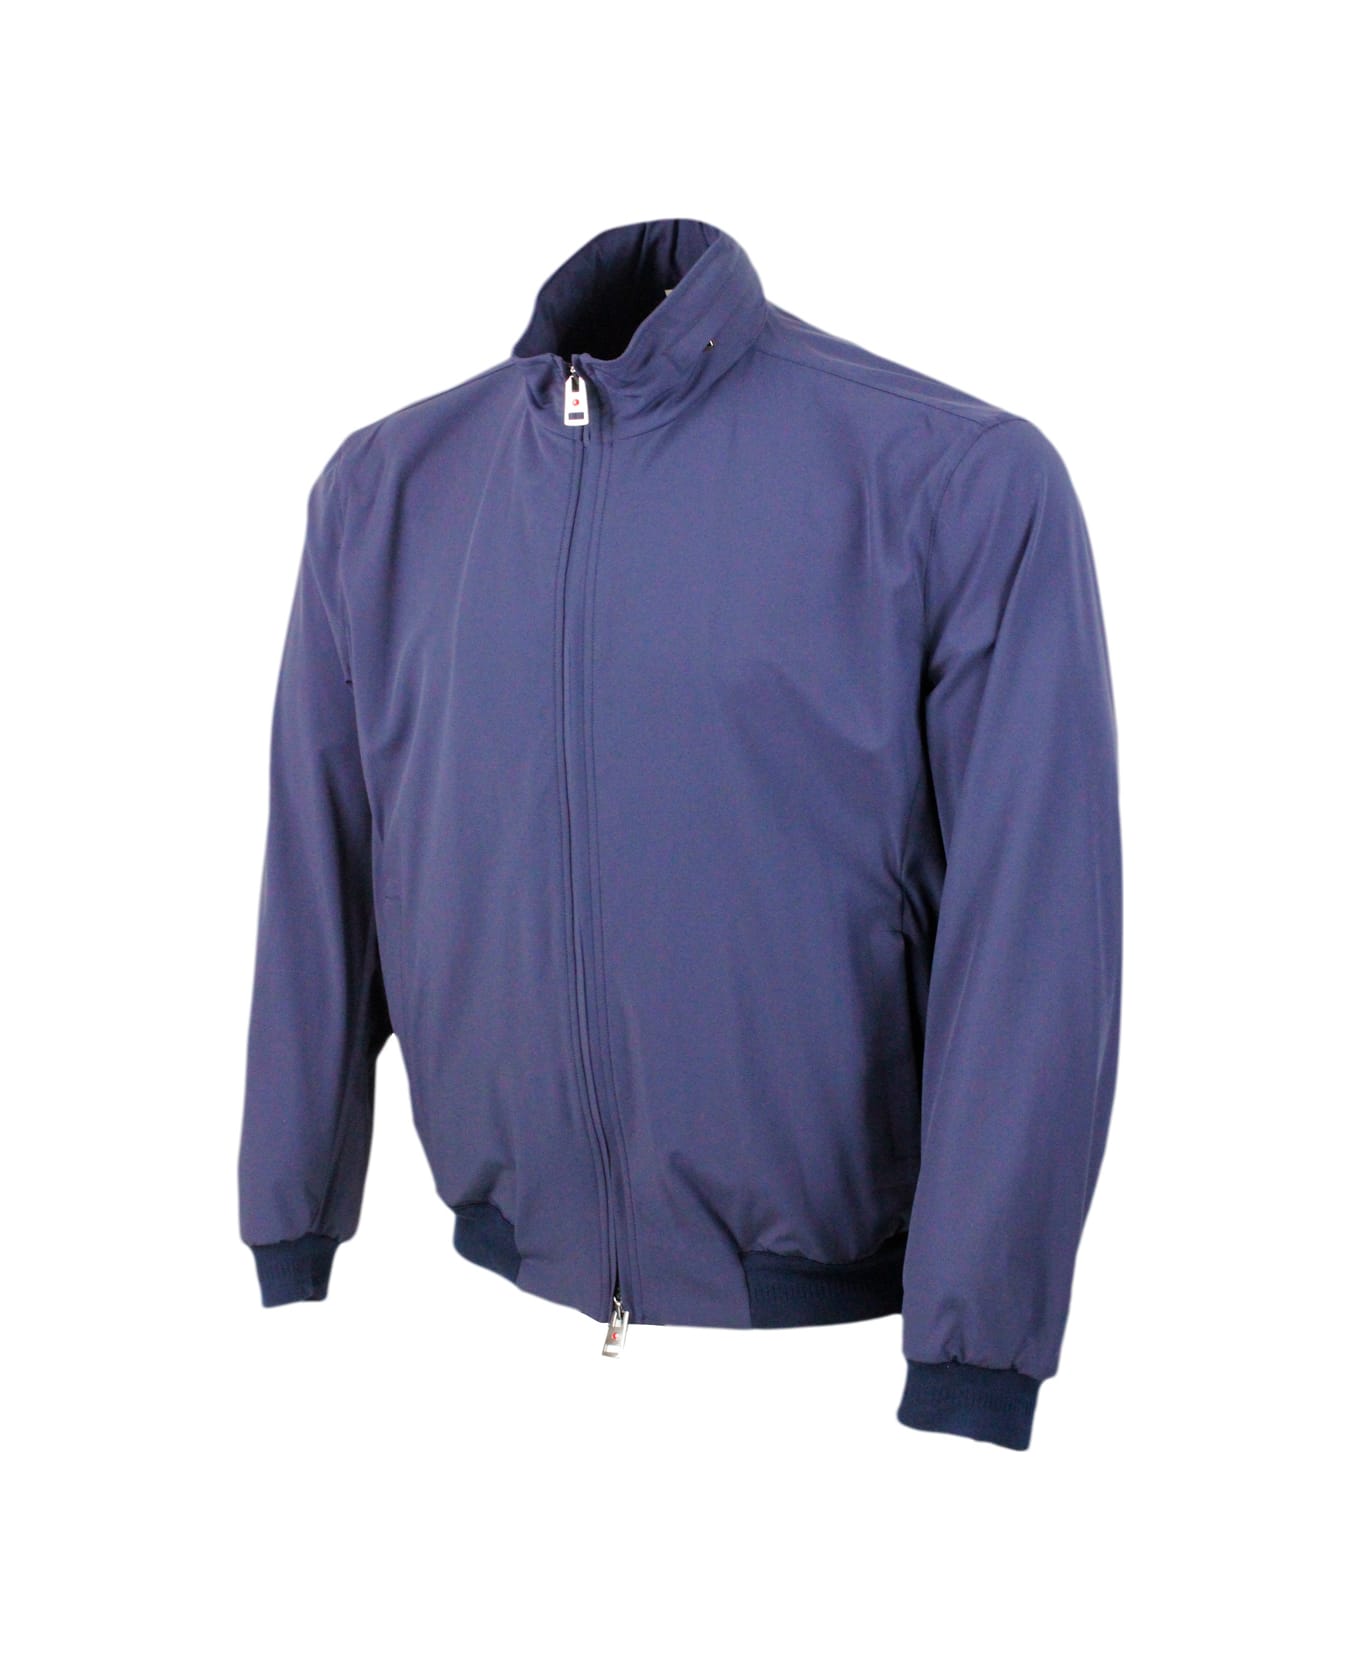 Kired Lightweight Bomber Jacket In Special Stretch Technical Fabric With Standing Collar And Concealed Hood On The Neck. Zip Closure - Blu